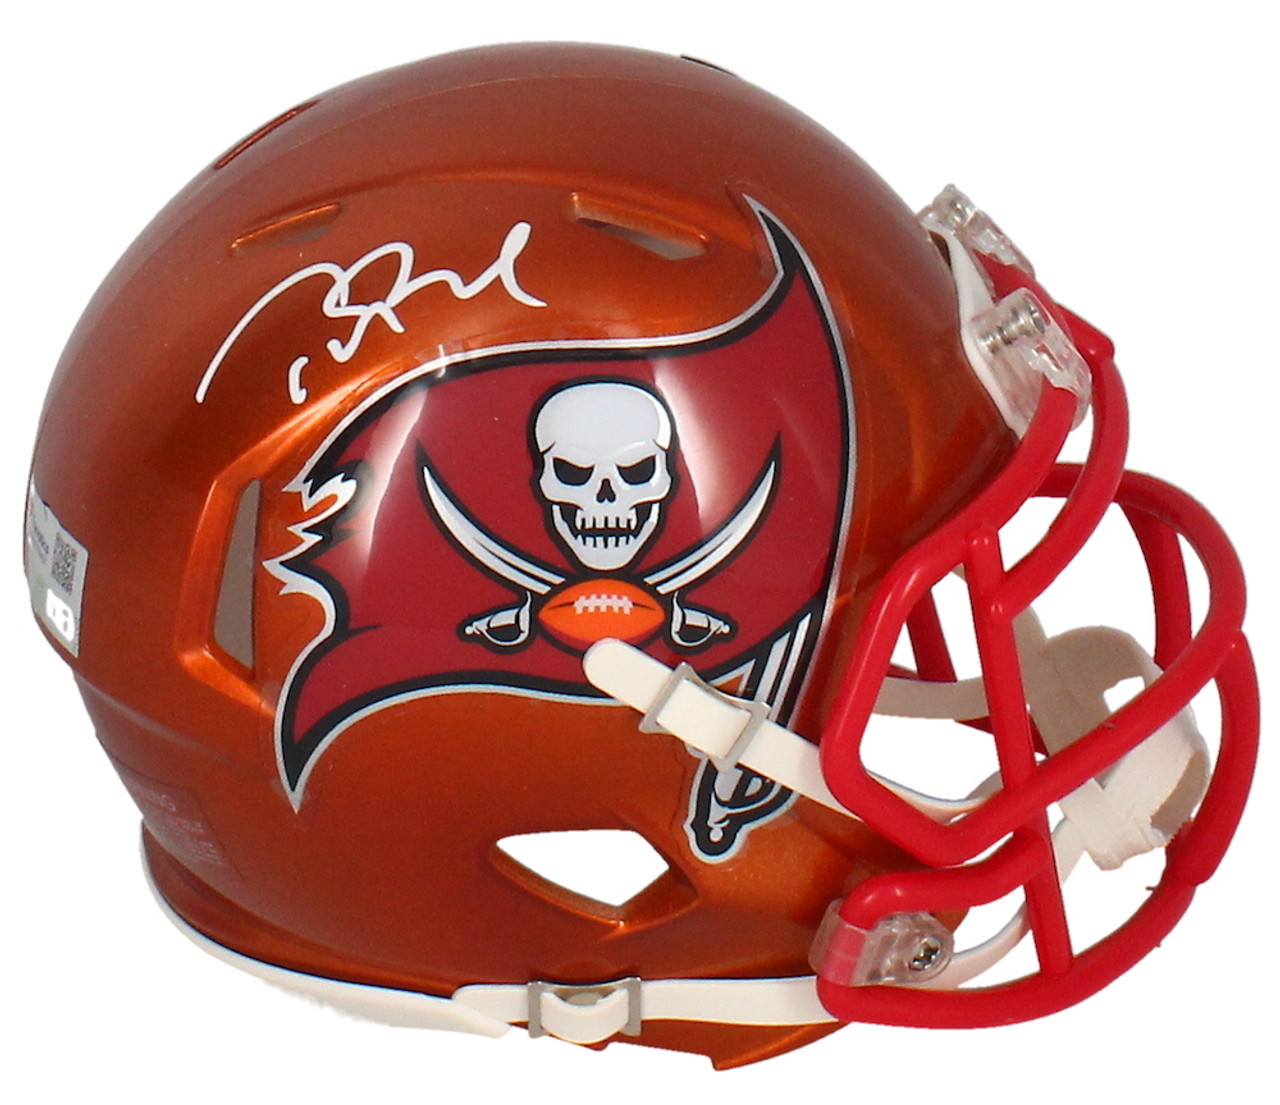 The Tampa Bay Buccaneers reveal their 40th anniversary patch